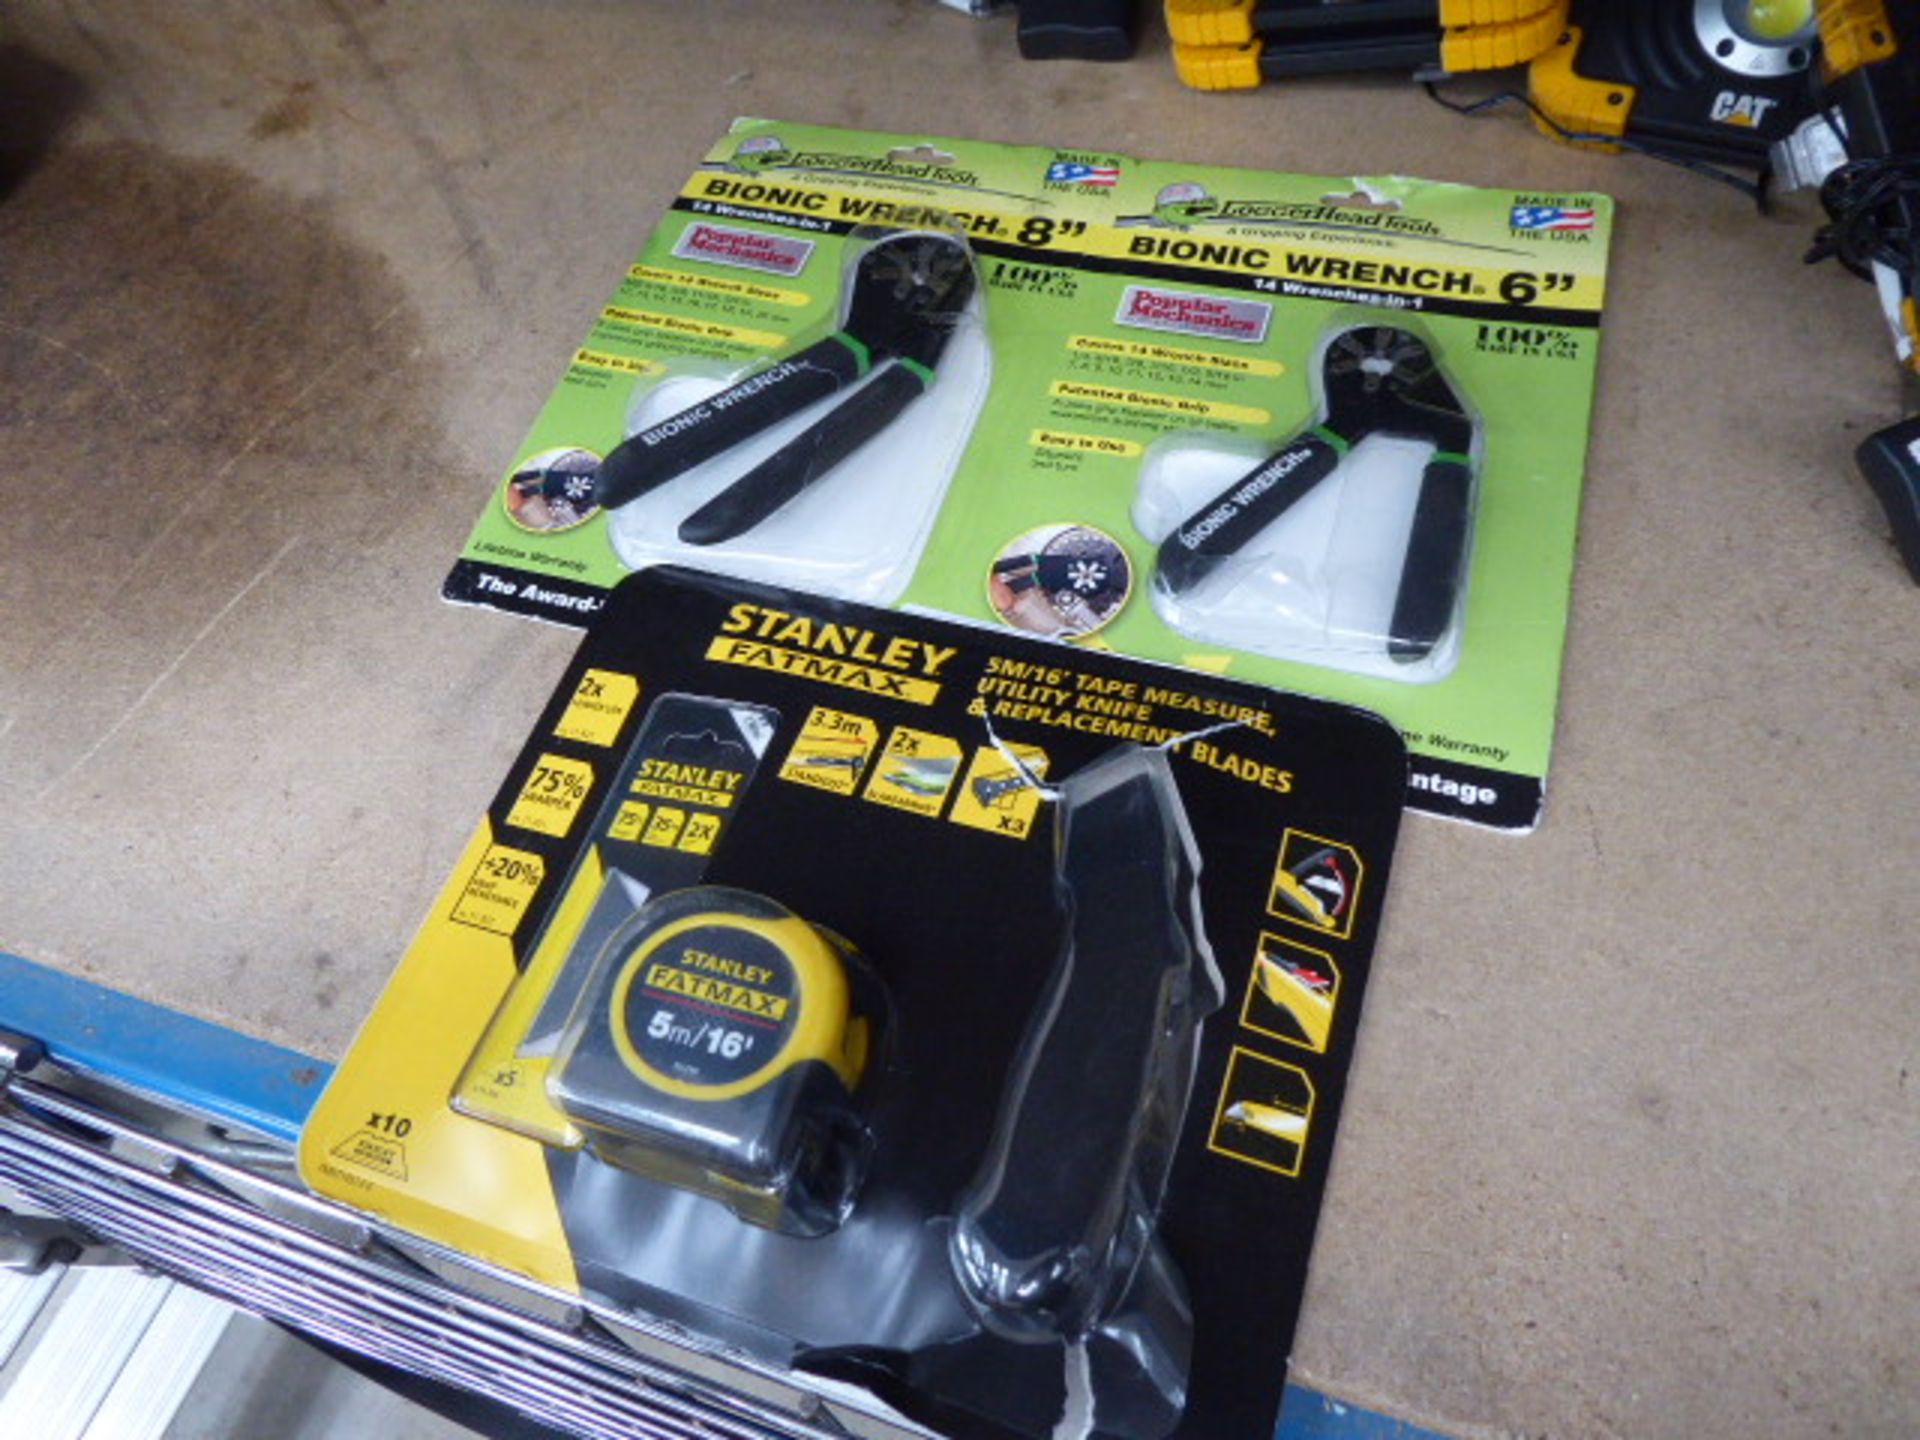 Stanley fatmax tape measure, 3 Cat lights, bionic wrenches, bulbs and under counter lights